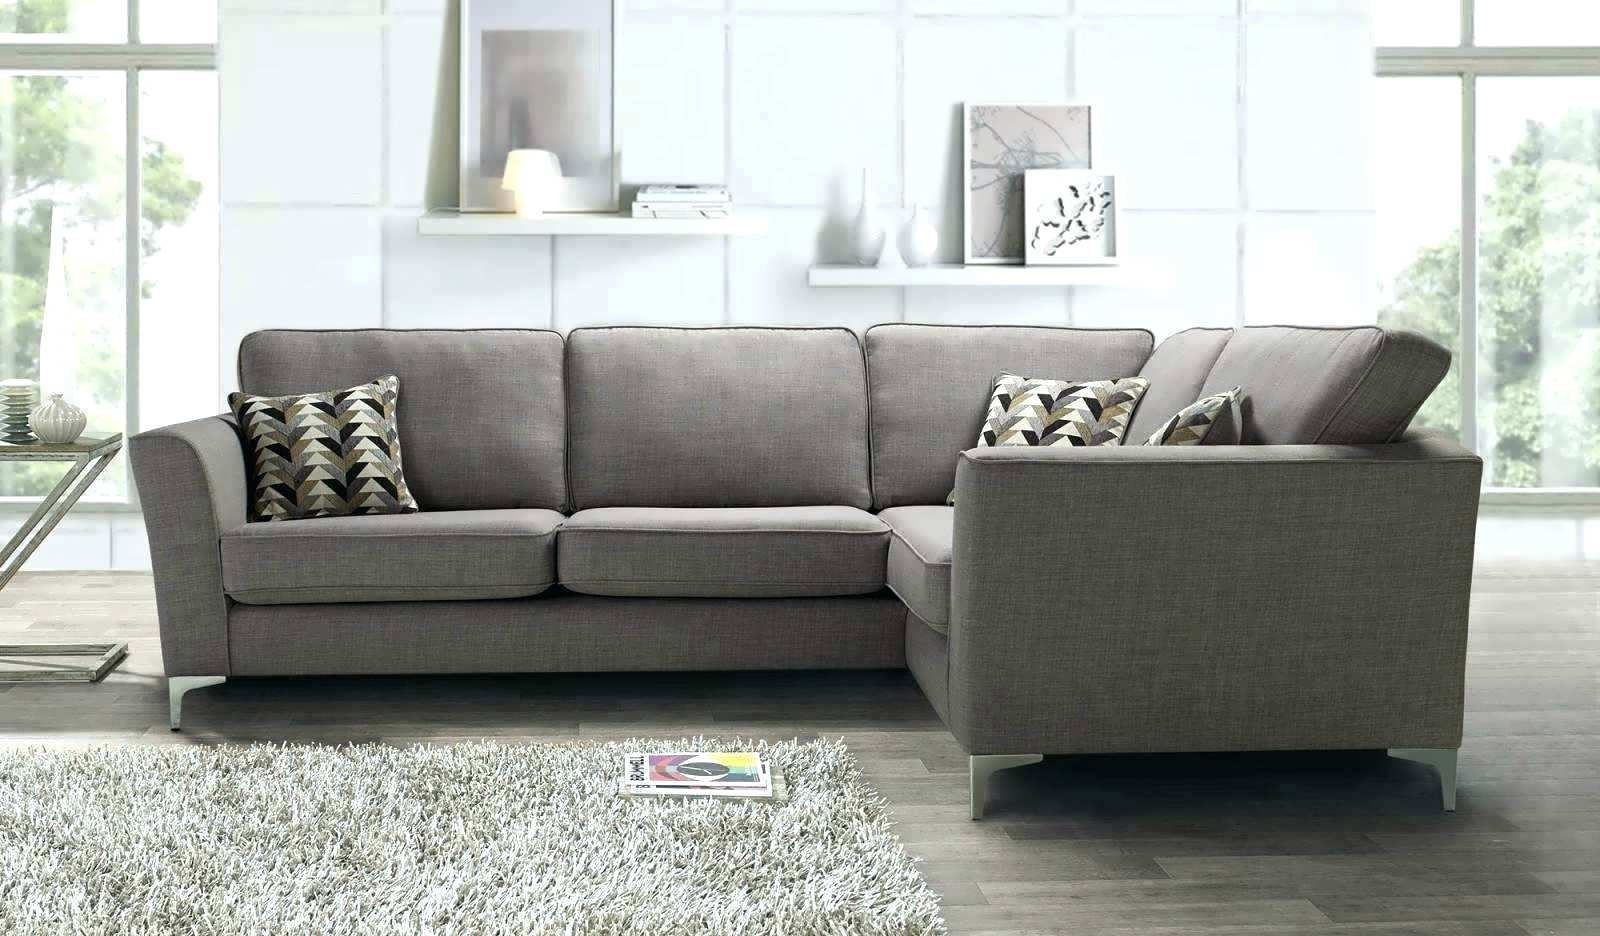 Mid Century Sectional Sofa For Sale Cleanupflorida.Com - Baby Shower Ideas